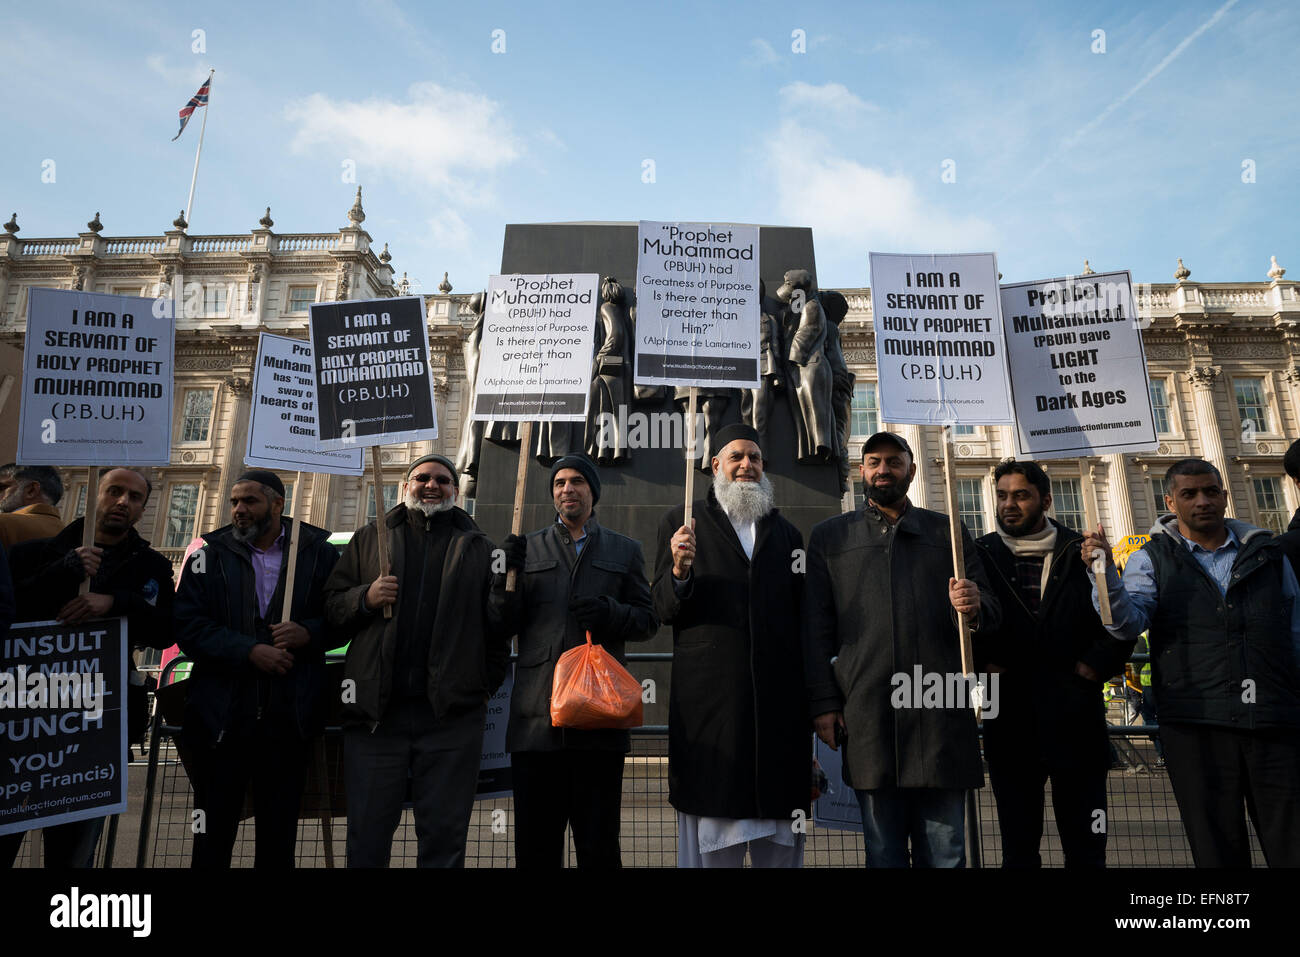 London, UK. 08th Feb, 2015. Hundreds of Muslims from London and another cities in UK came to Downing Street today to protest against reprinting of the cartoon of Holy Prophet Muhammad. Pictures of the Prophet Muhammad are forbidden in Islam due to the central tenet that Muhammad was a man, not a god, and that portraying him could lead to revering a human in lieu of Allah. Credit:  ZUMA Press, Inc./Alamy Live News Stock Photo